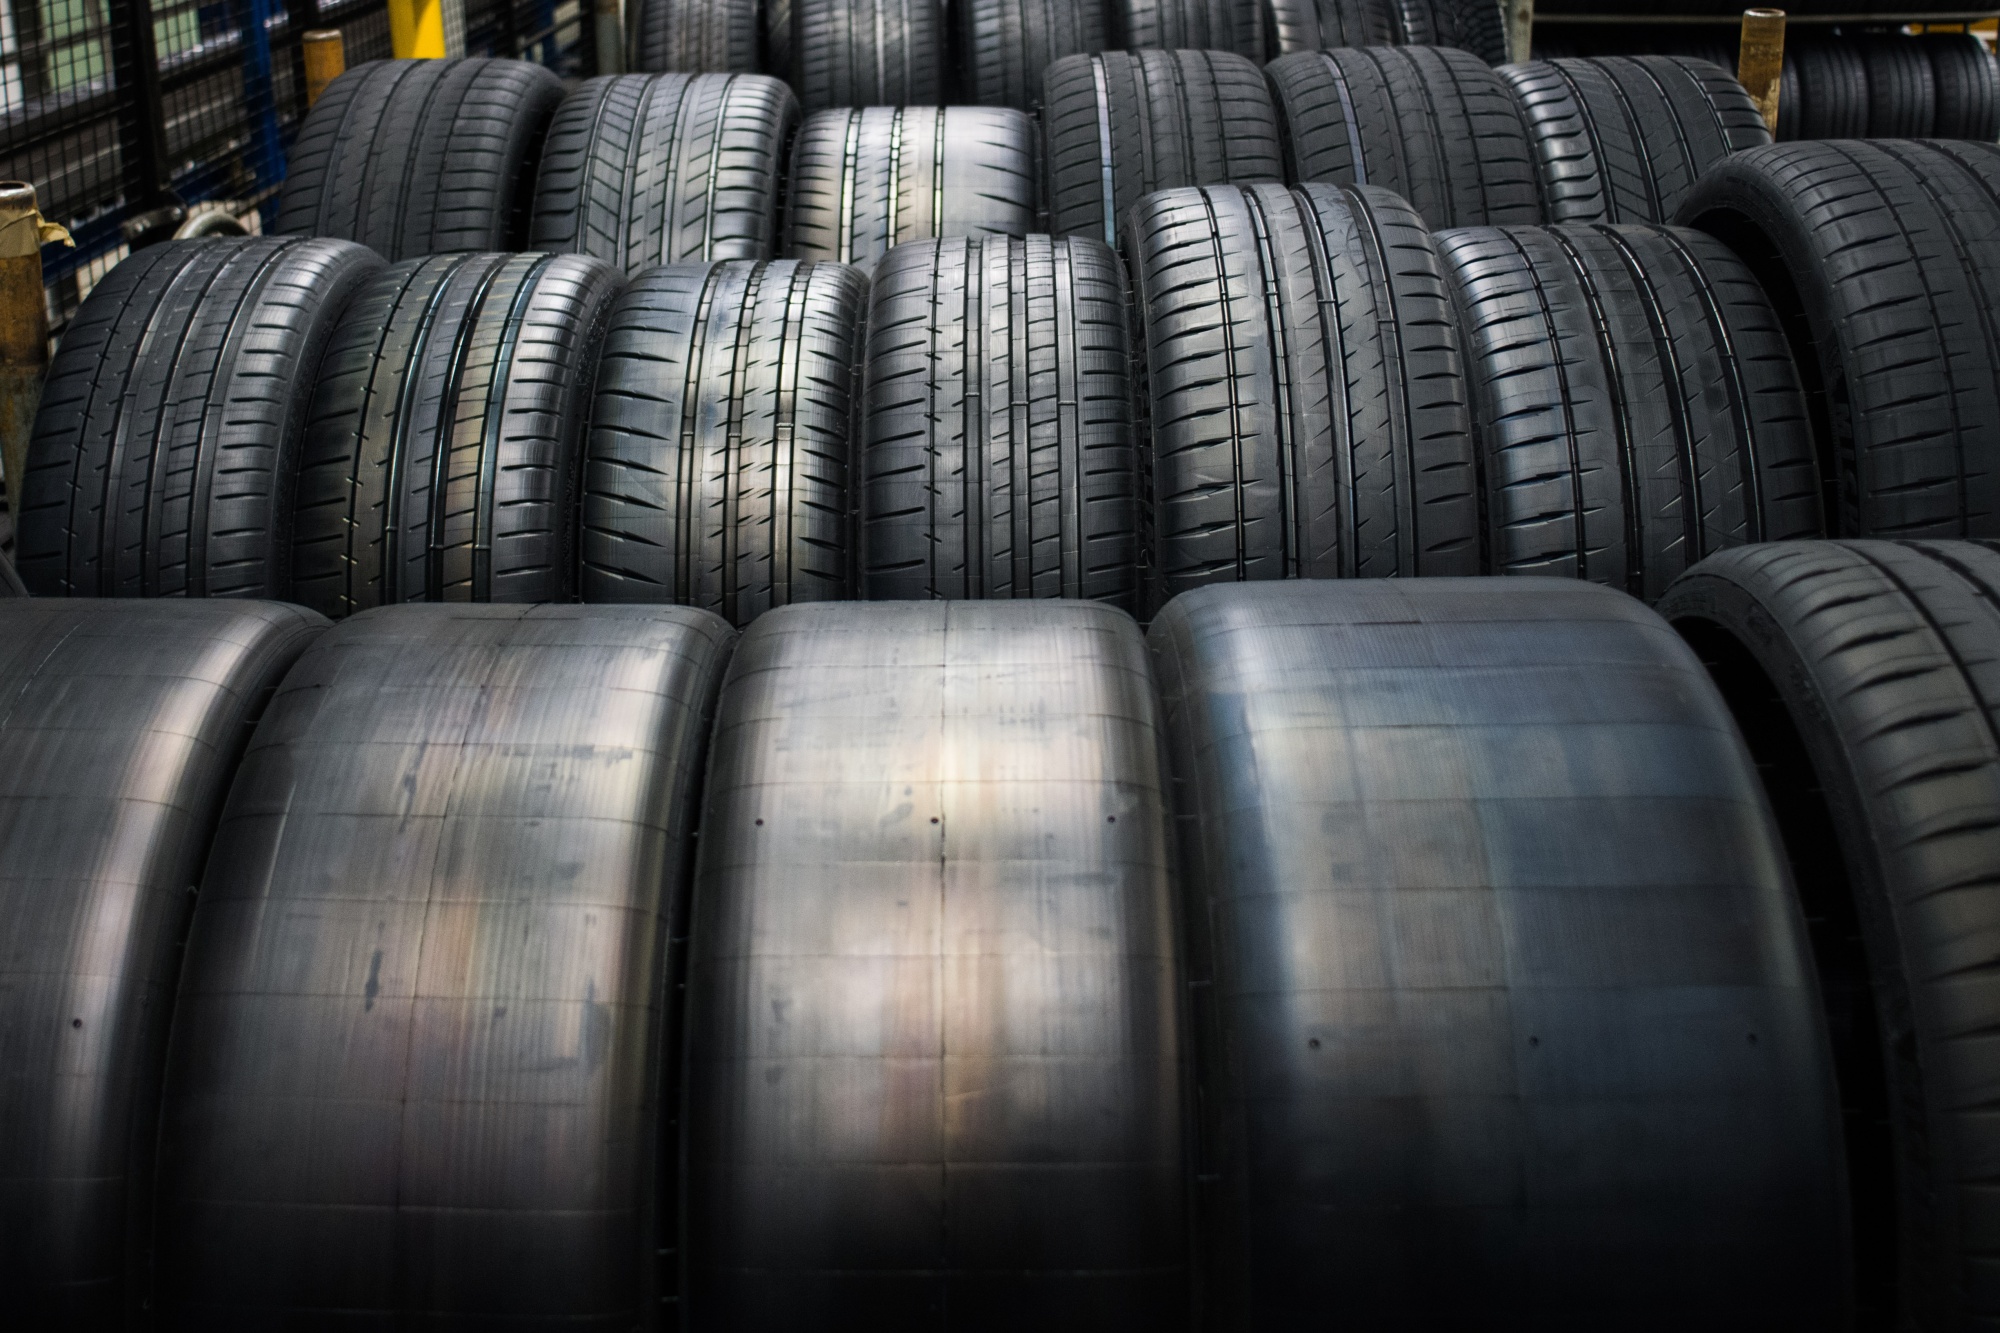 Rows of automobile tires at a retouching workshop in&nbsp;France.